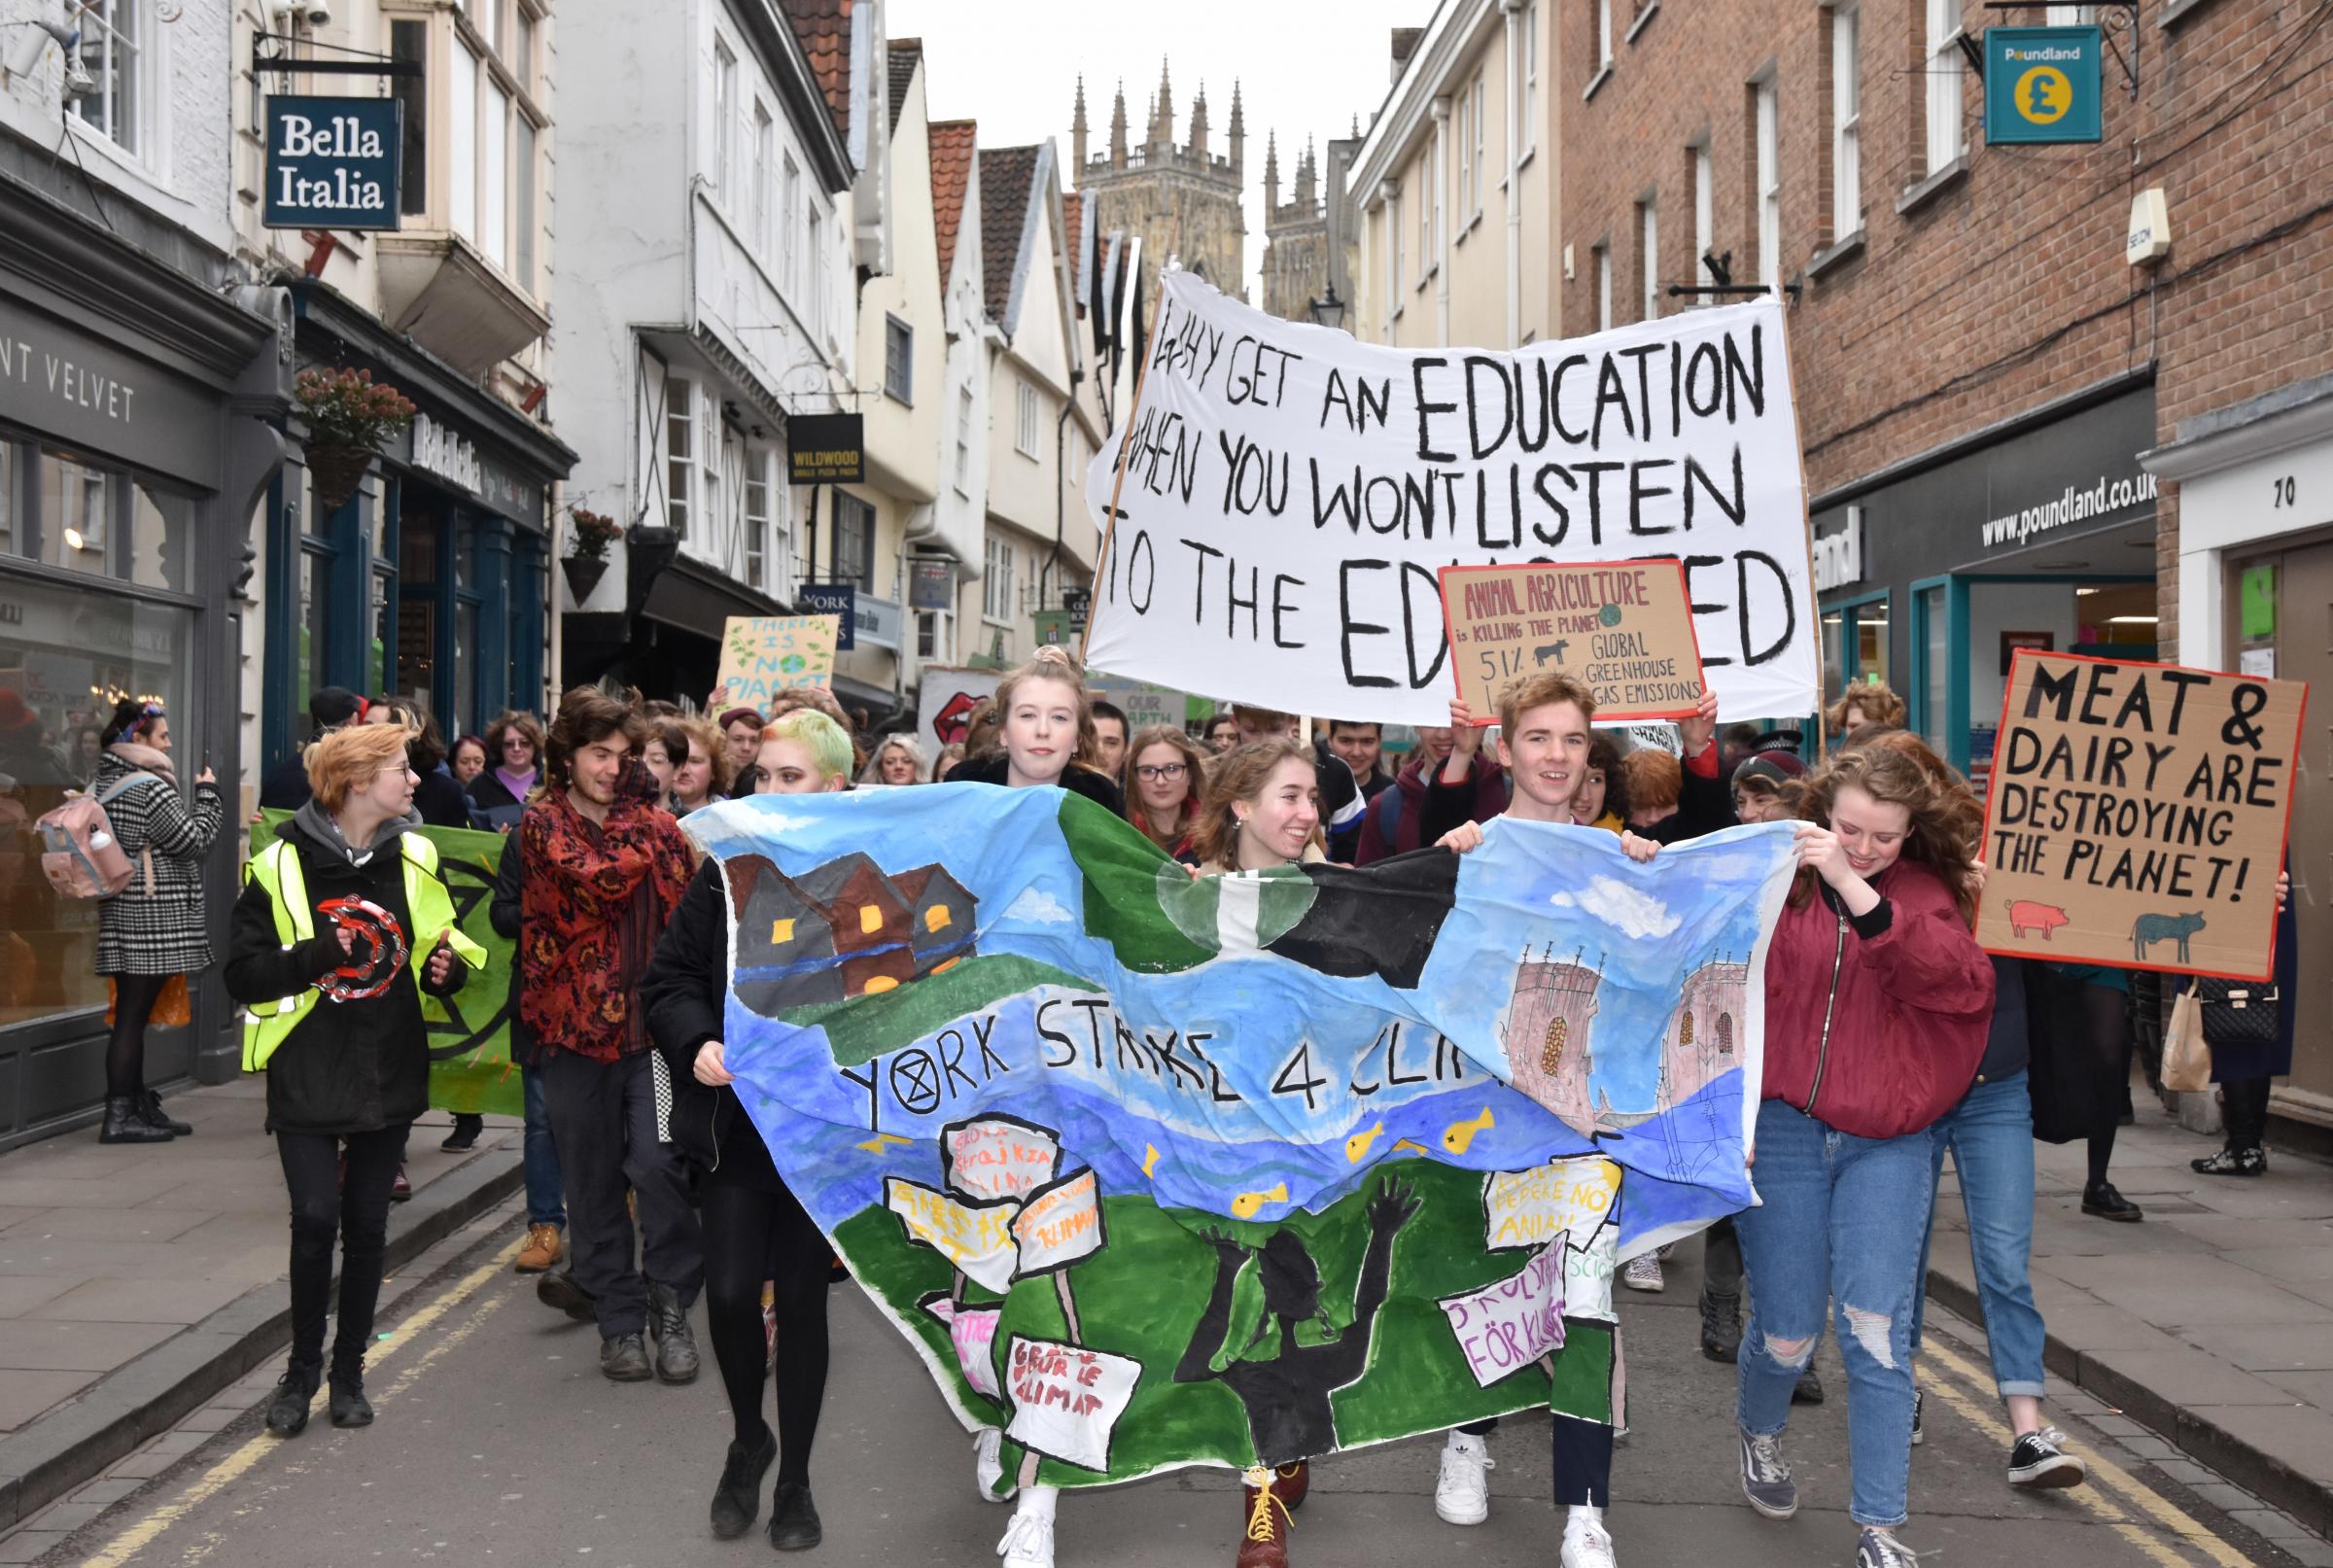 York giving up on climate emergency - city wont hit net zero target